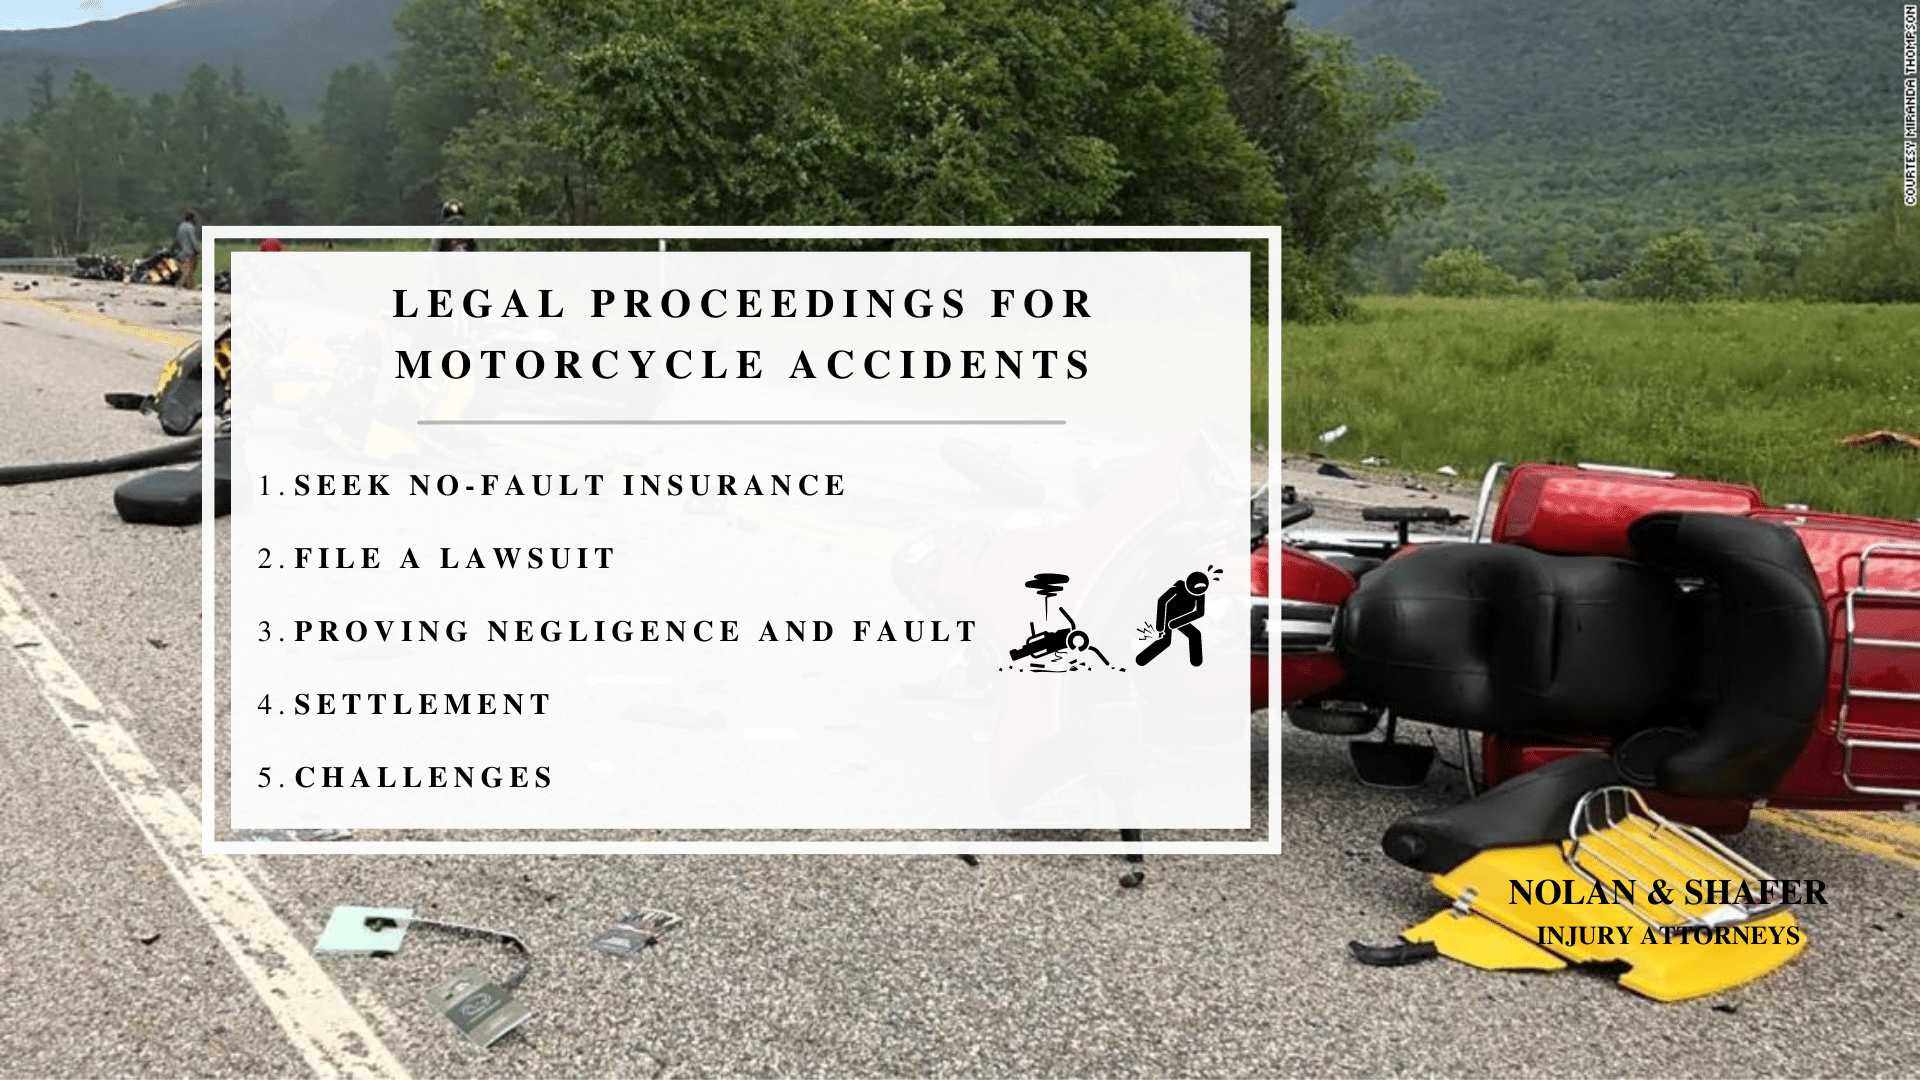 Infographic image of legal proceedings for motorcycle accidents